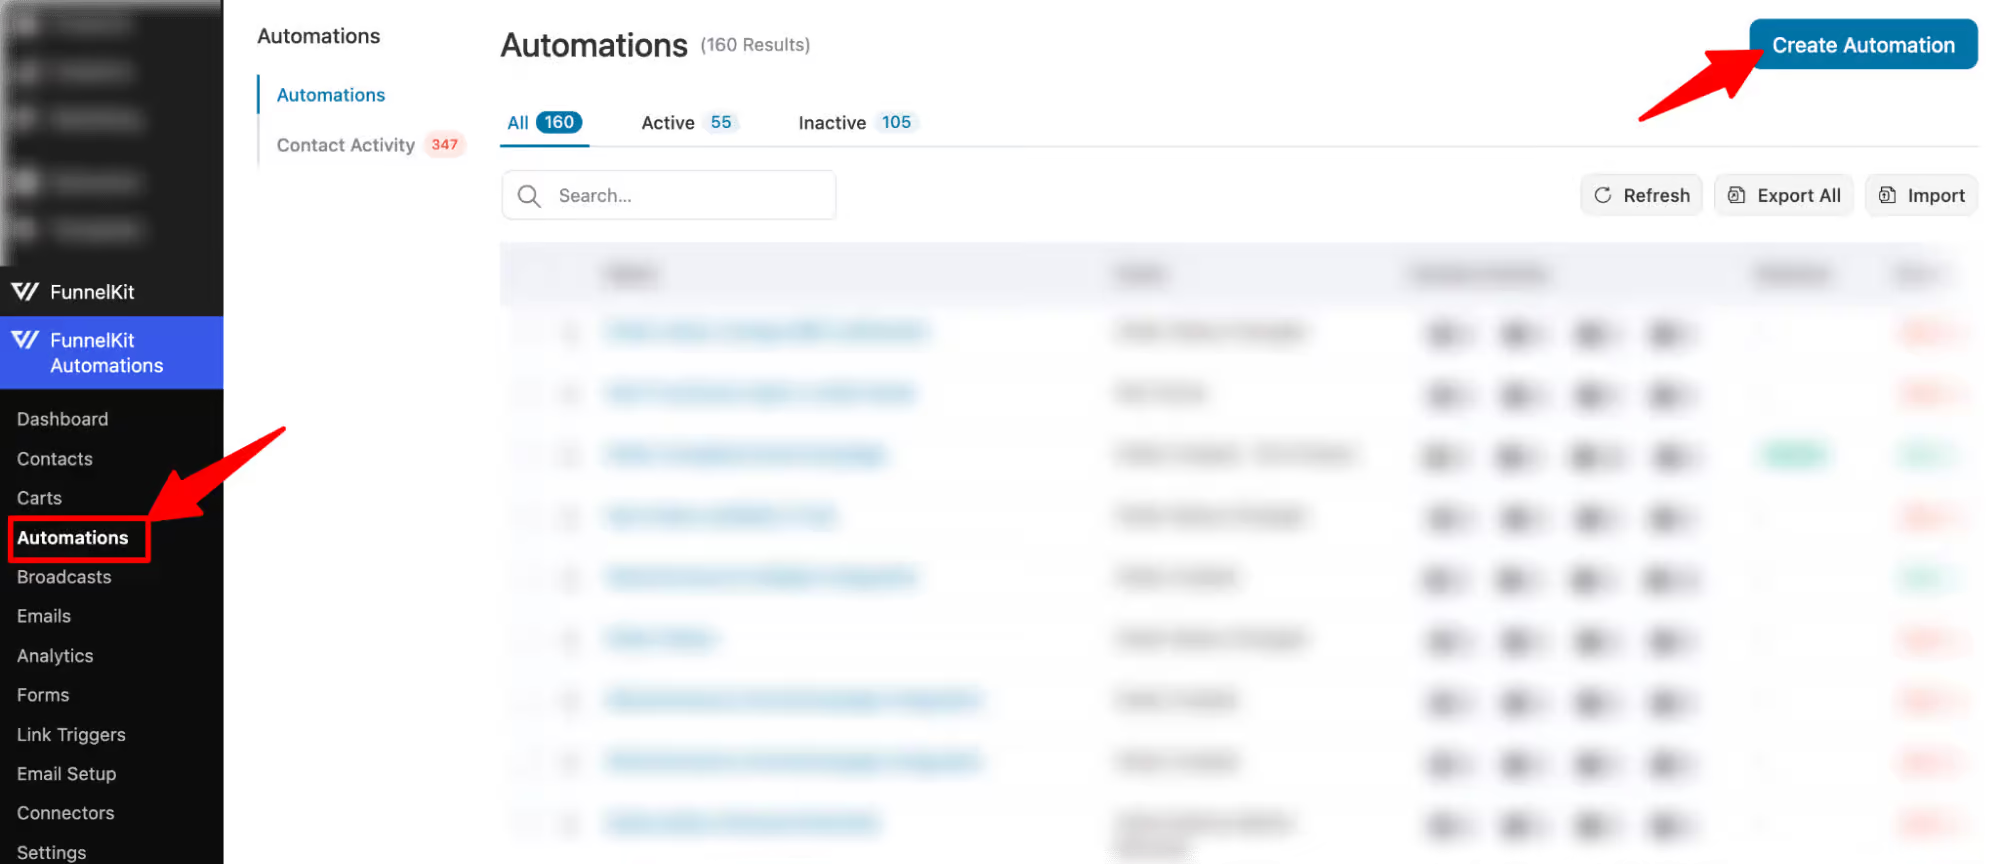 create new automation to send email with product recommendations